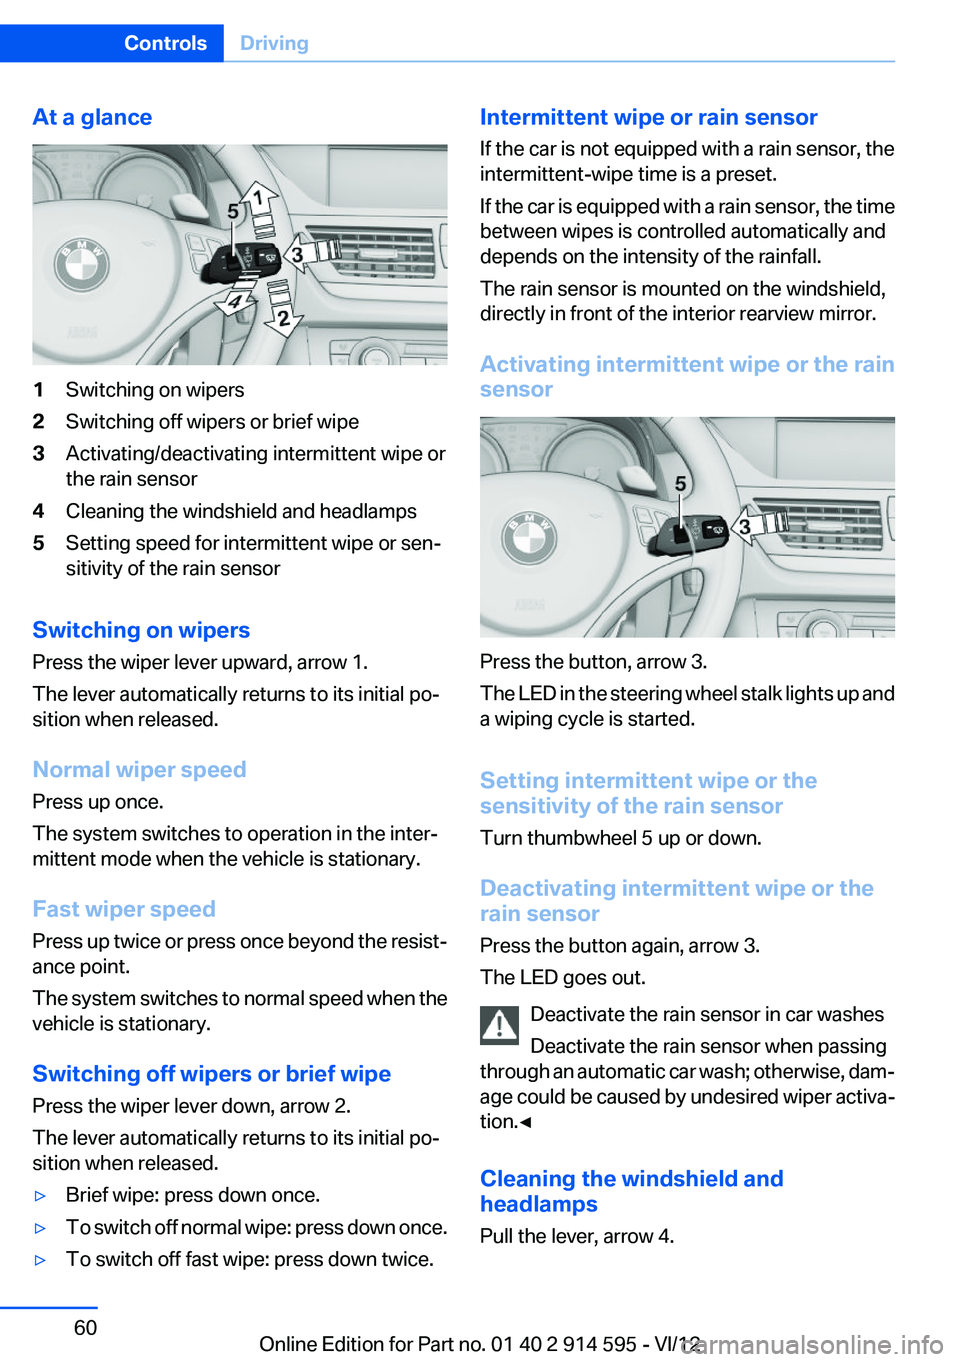 BMW X1 XDRIVE 35I 2013  Owners Manual At a glance1Switching on wipers2Switching off wipers or brief wipe3Activating/deactivating intermittent wipe or
the rain sensor4Cleaning the windshield and headlamps5Setting speed for intermittent wip